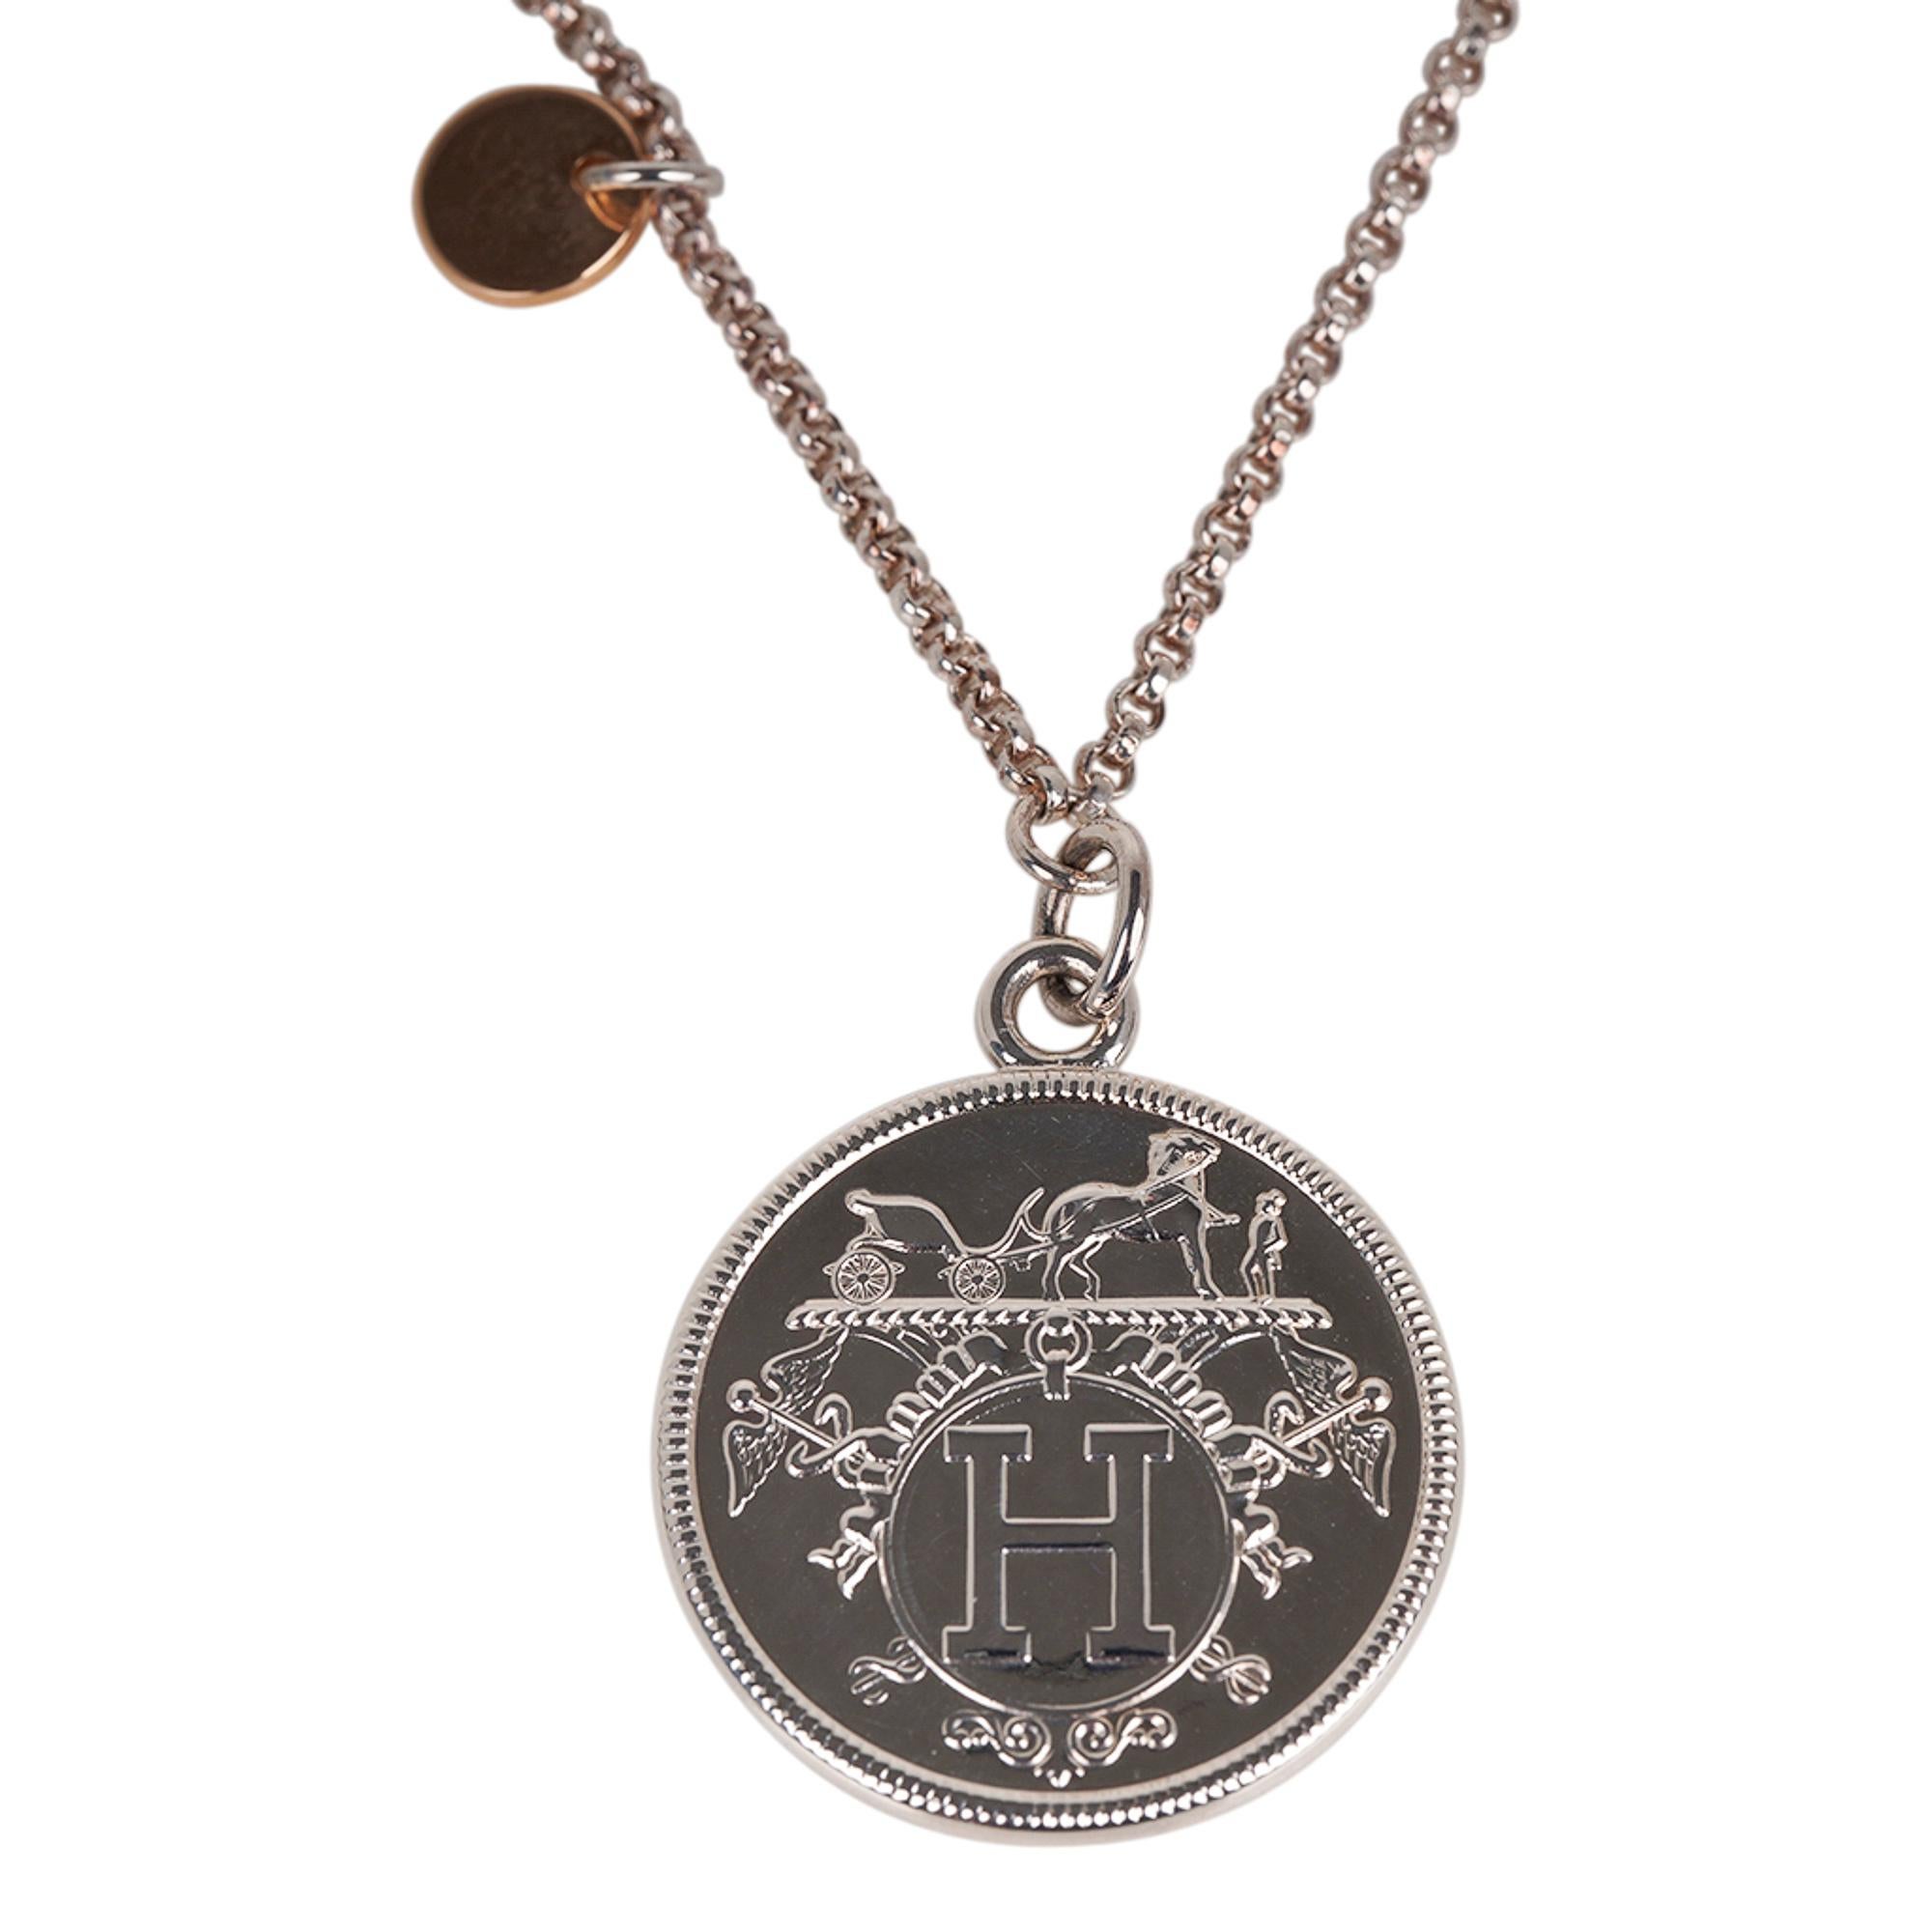 Mightychic offers an Hermes Ex Libris Necklace Medium Model.
Featured in Sterling Silver with small round disk pendant in 18k Rose Gold.
Toggle closure.
Beautiful and unmistakably Hermes.
Comes with Hermes box.
NEW or NEVER WORN.
final